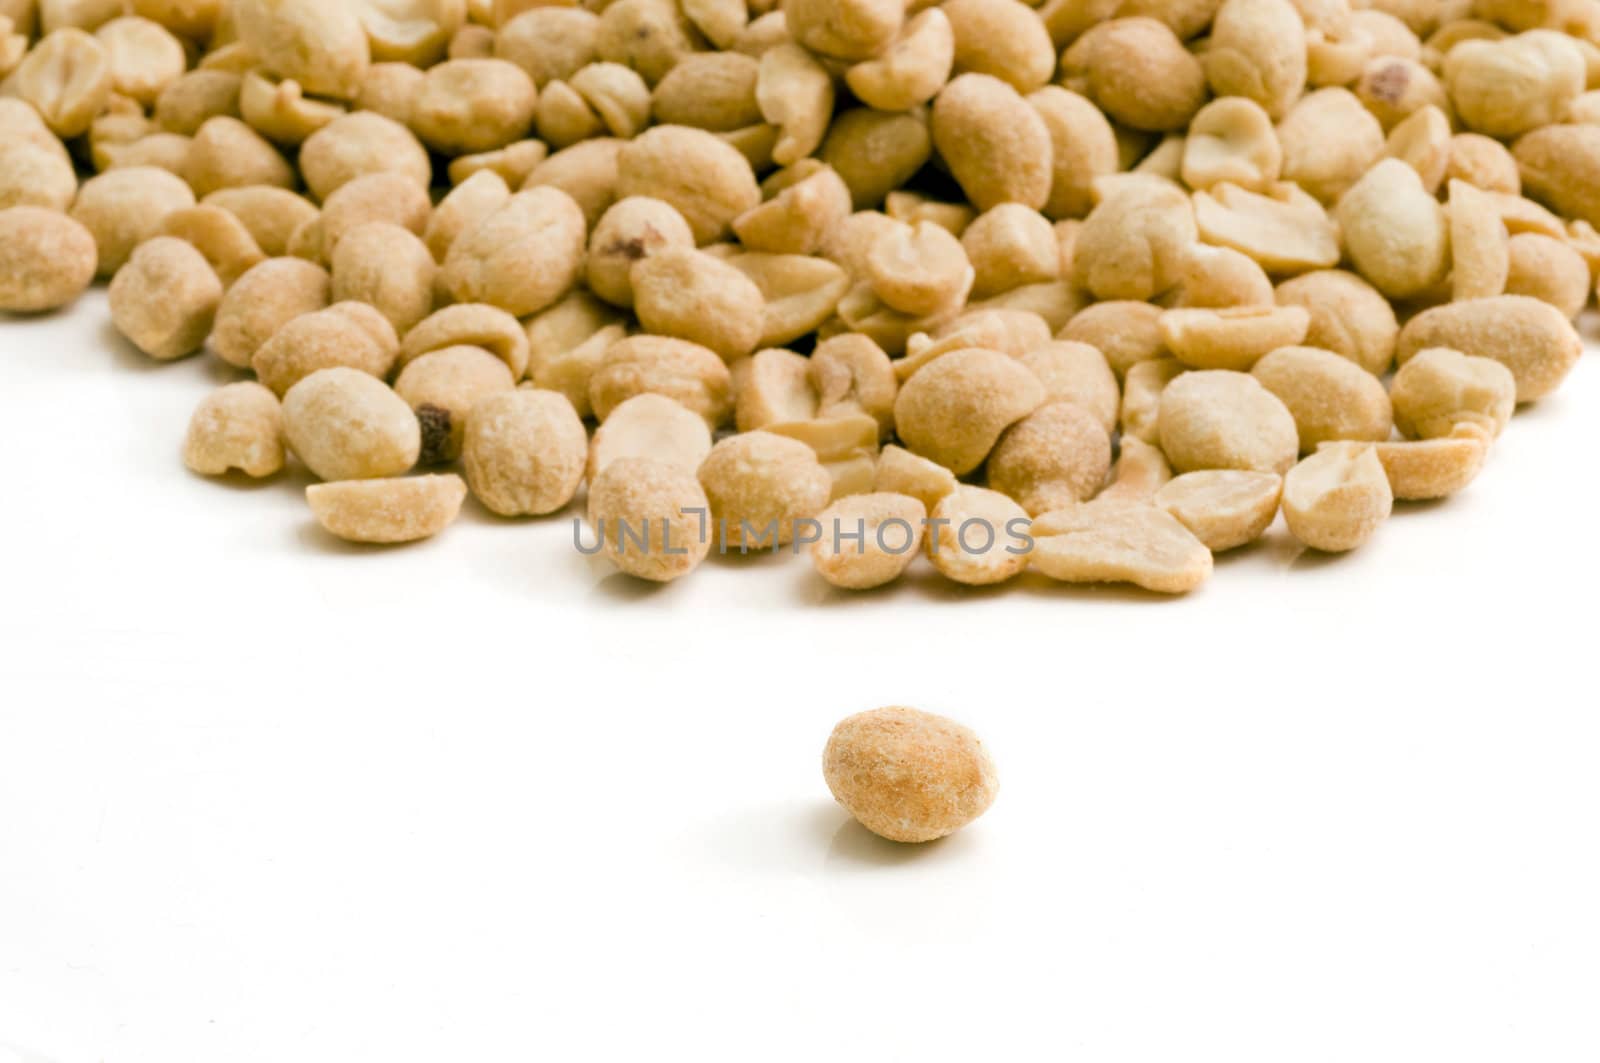 Selective focus on the individual peanut in the foreground a group of peanuts